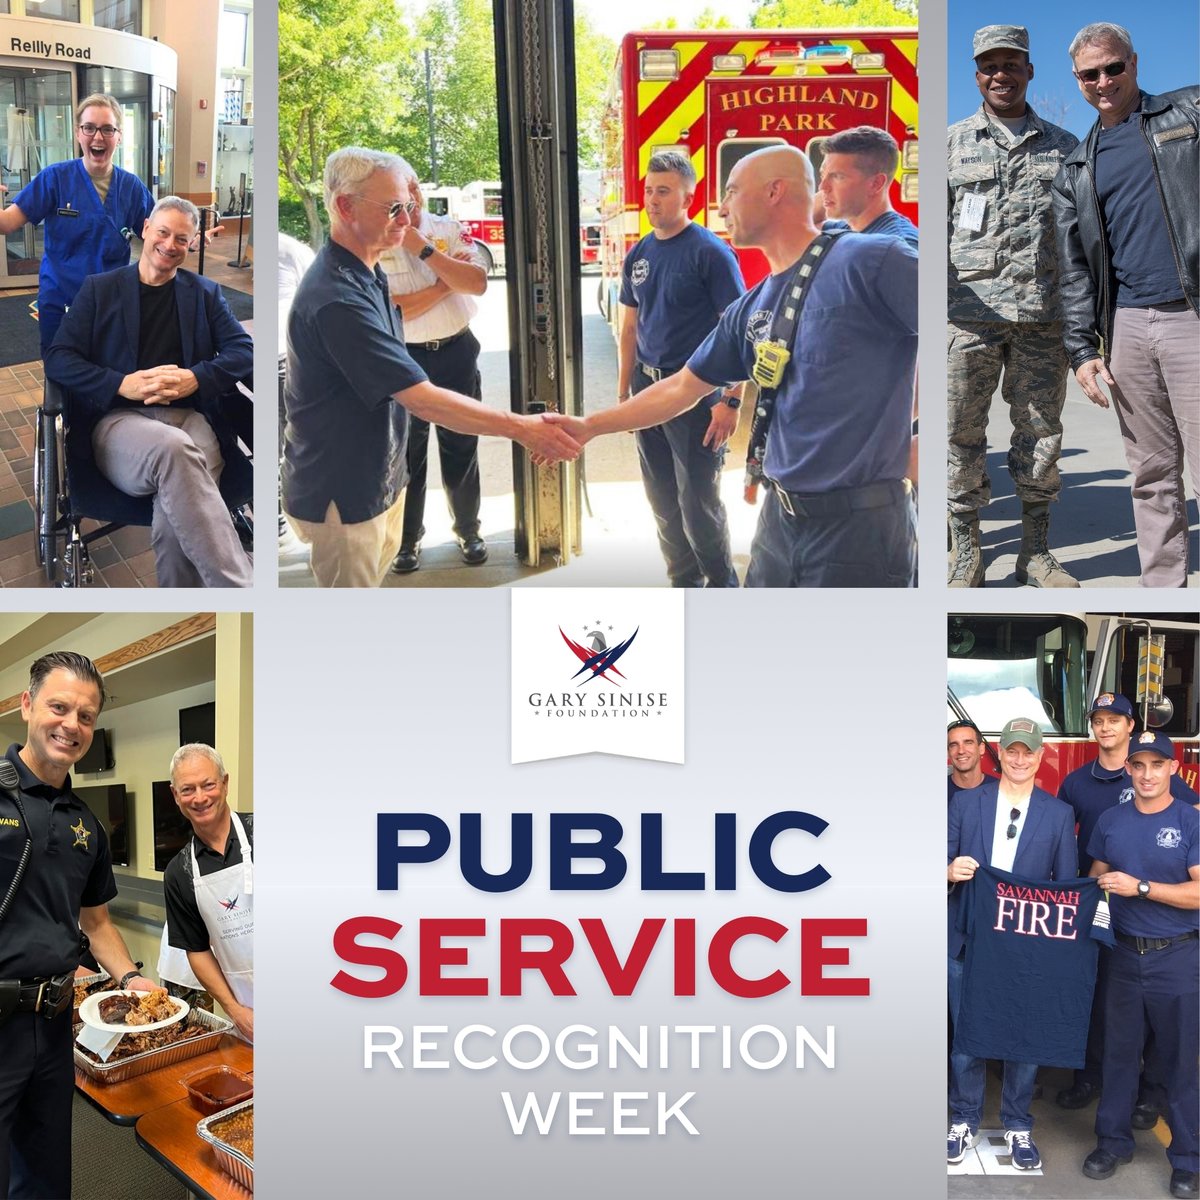 Today we begin celebrating #PublicServiceRecognitioWeek, which is dedicated to honoring the public servants who serve our communities & put the safety/well-being of others before their own. Show your appreciation for public servants in your hometown in the comments below!